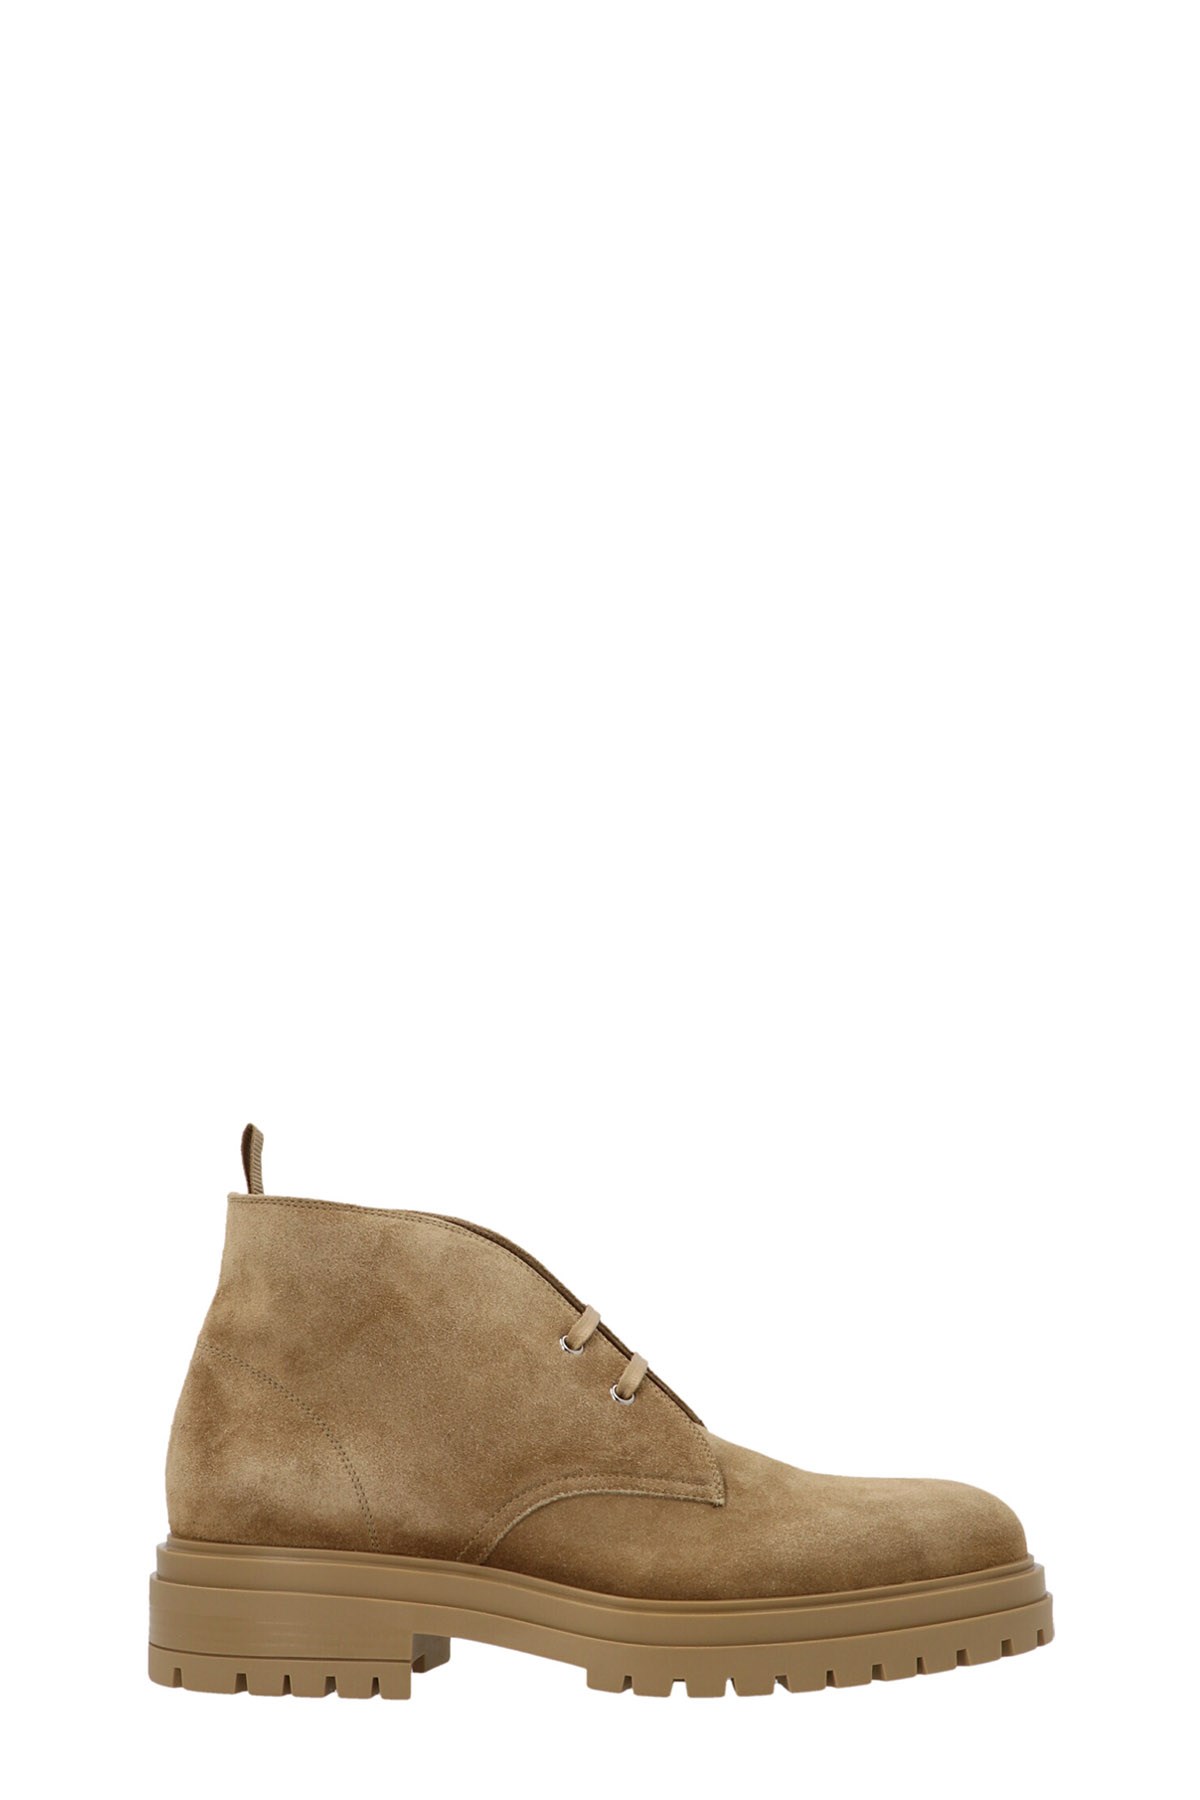 GIANVITO ROSSI 'Humphrey' Lace-Up Ankle Boots